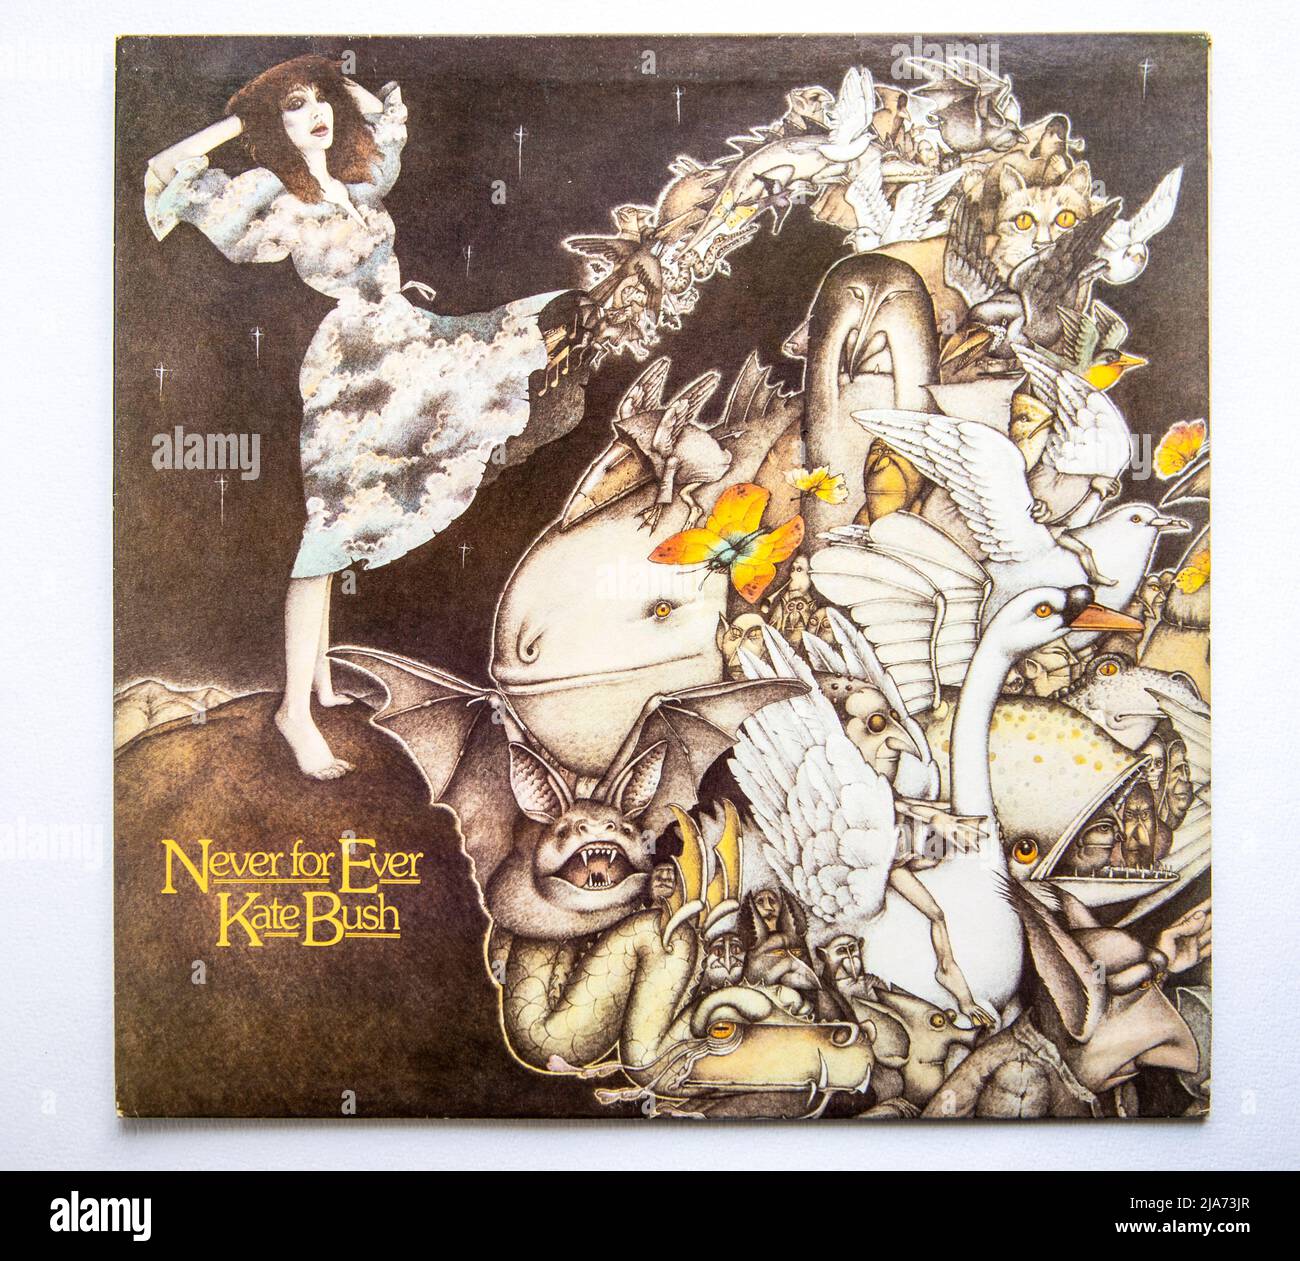 LP cover Never Forever, the third album by Kate Bush, which was released in 1980 Photo - Alamy